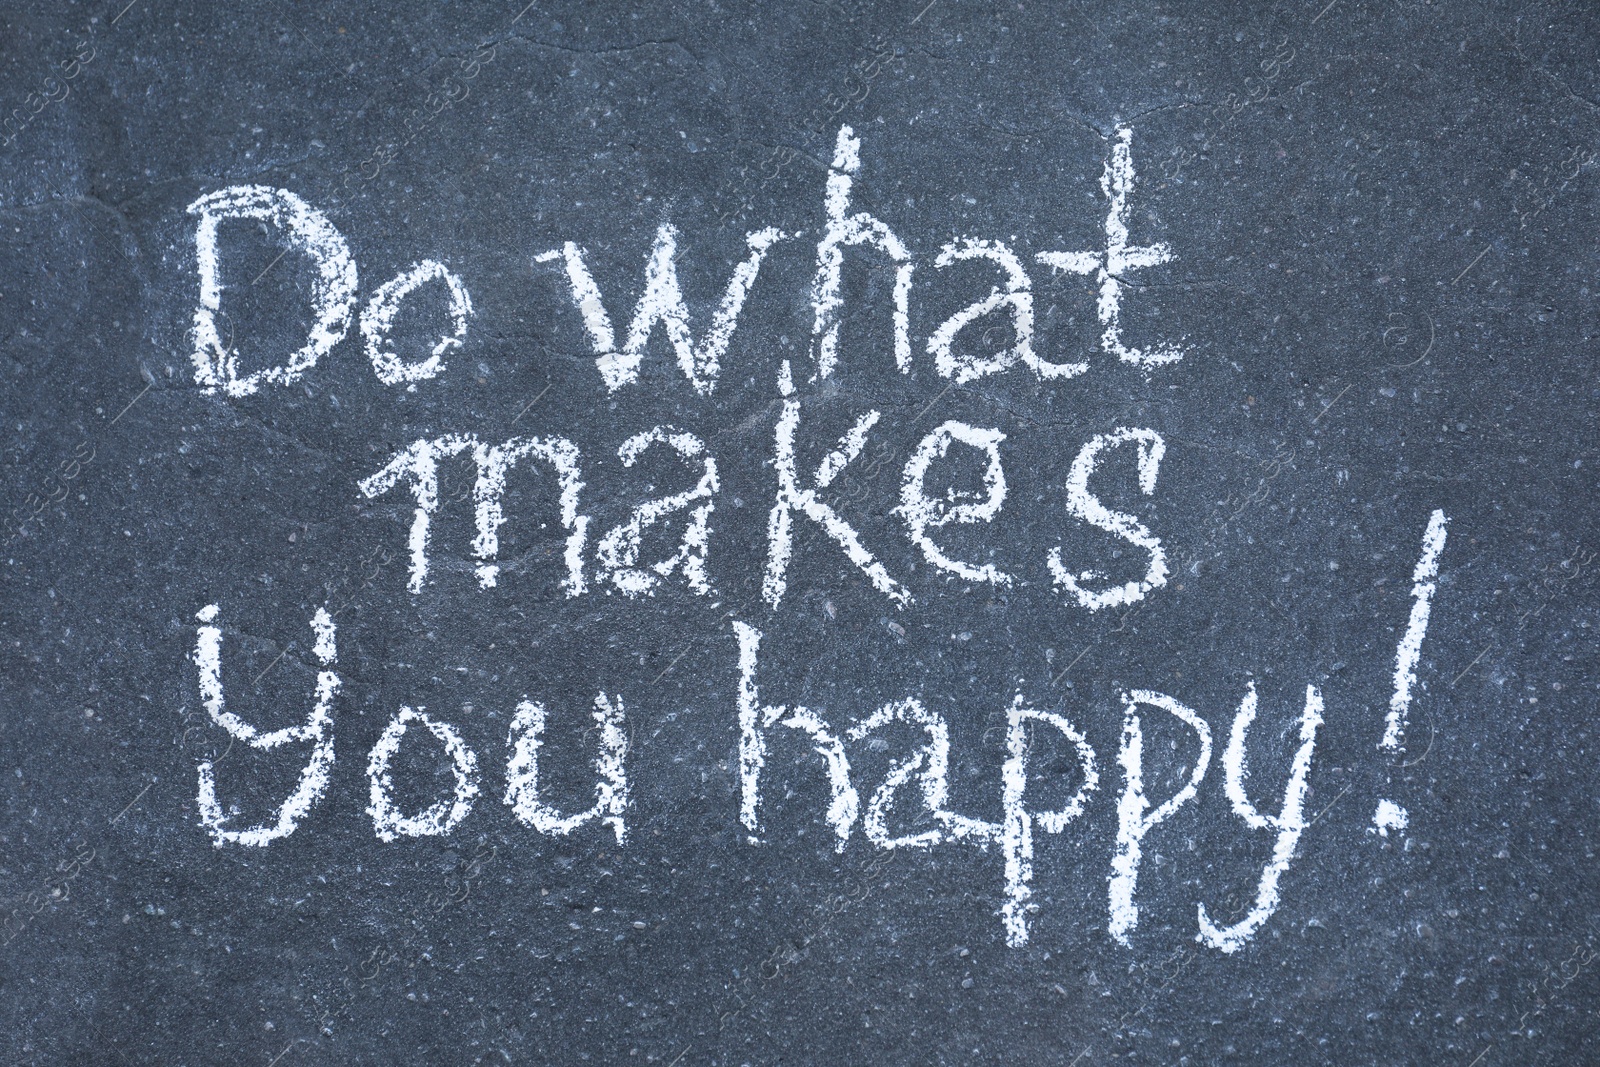 Photo of Phrase Do What Makes You Happy with exclamation mark written on asphalt, top view